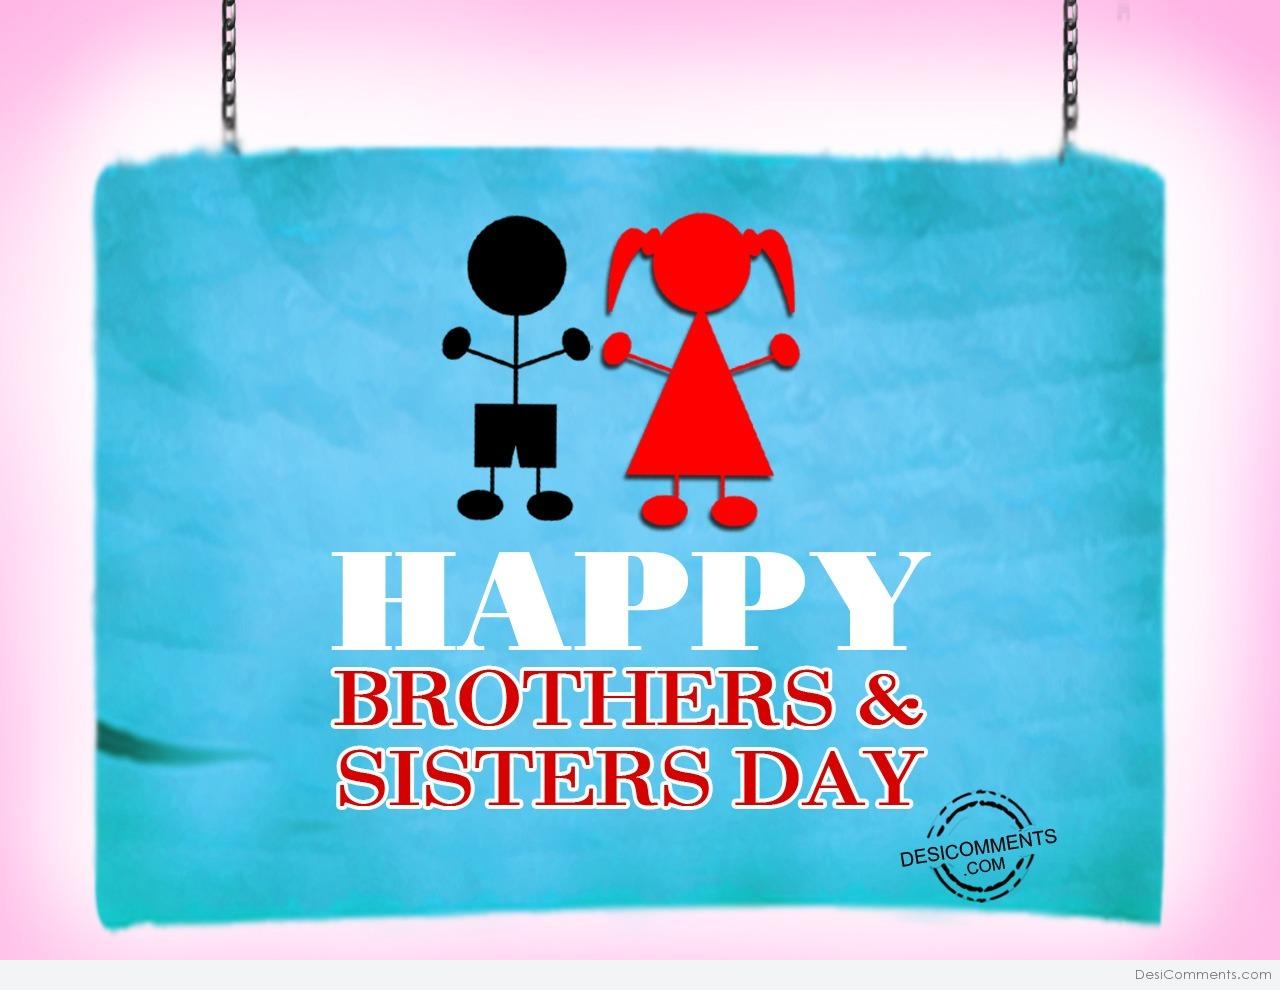 Brother watching sister. Brothers and sisters Day. Sister Day. Happy brothers and sisters Day. Brothers and sisters магазин.